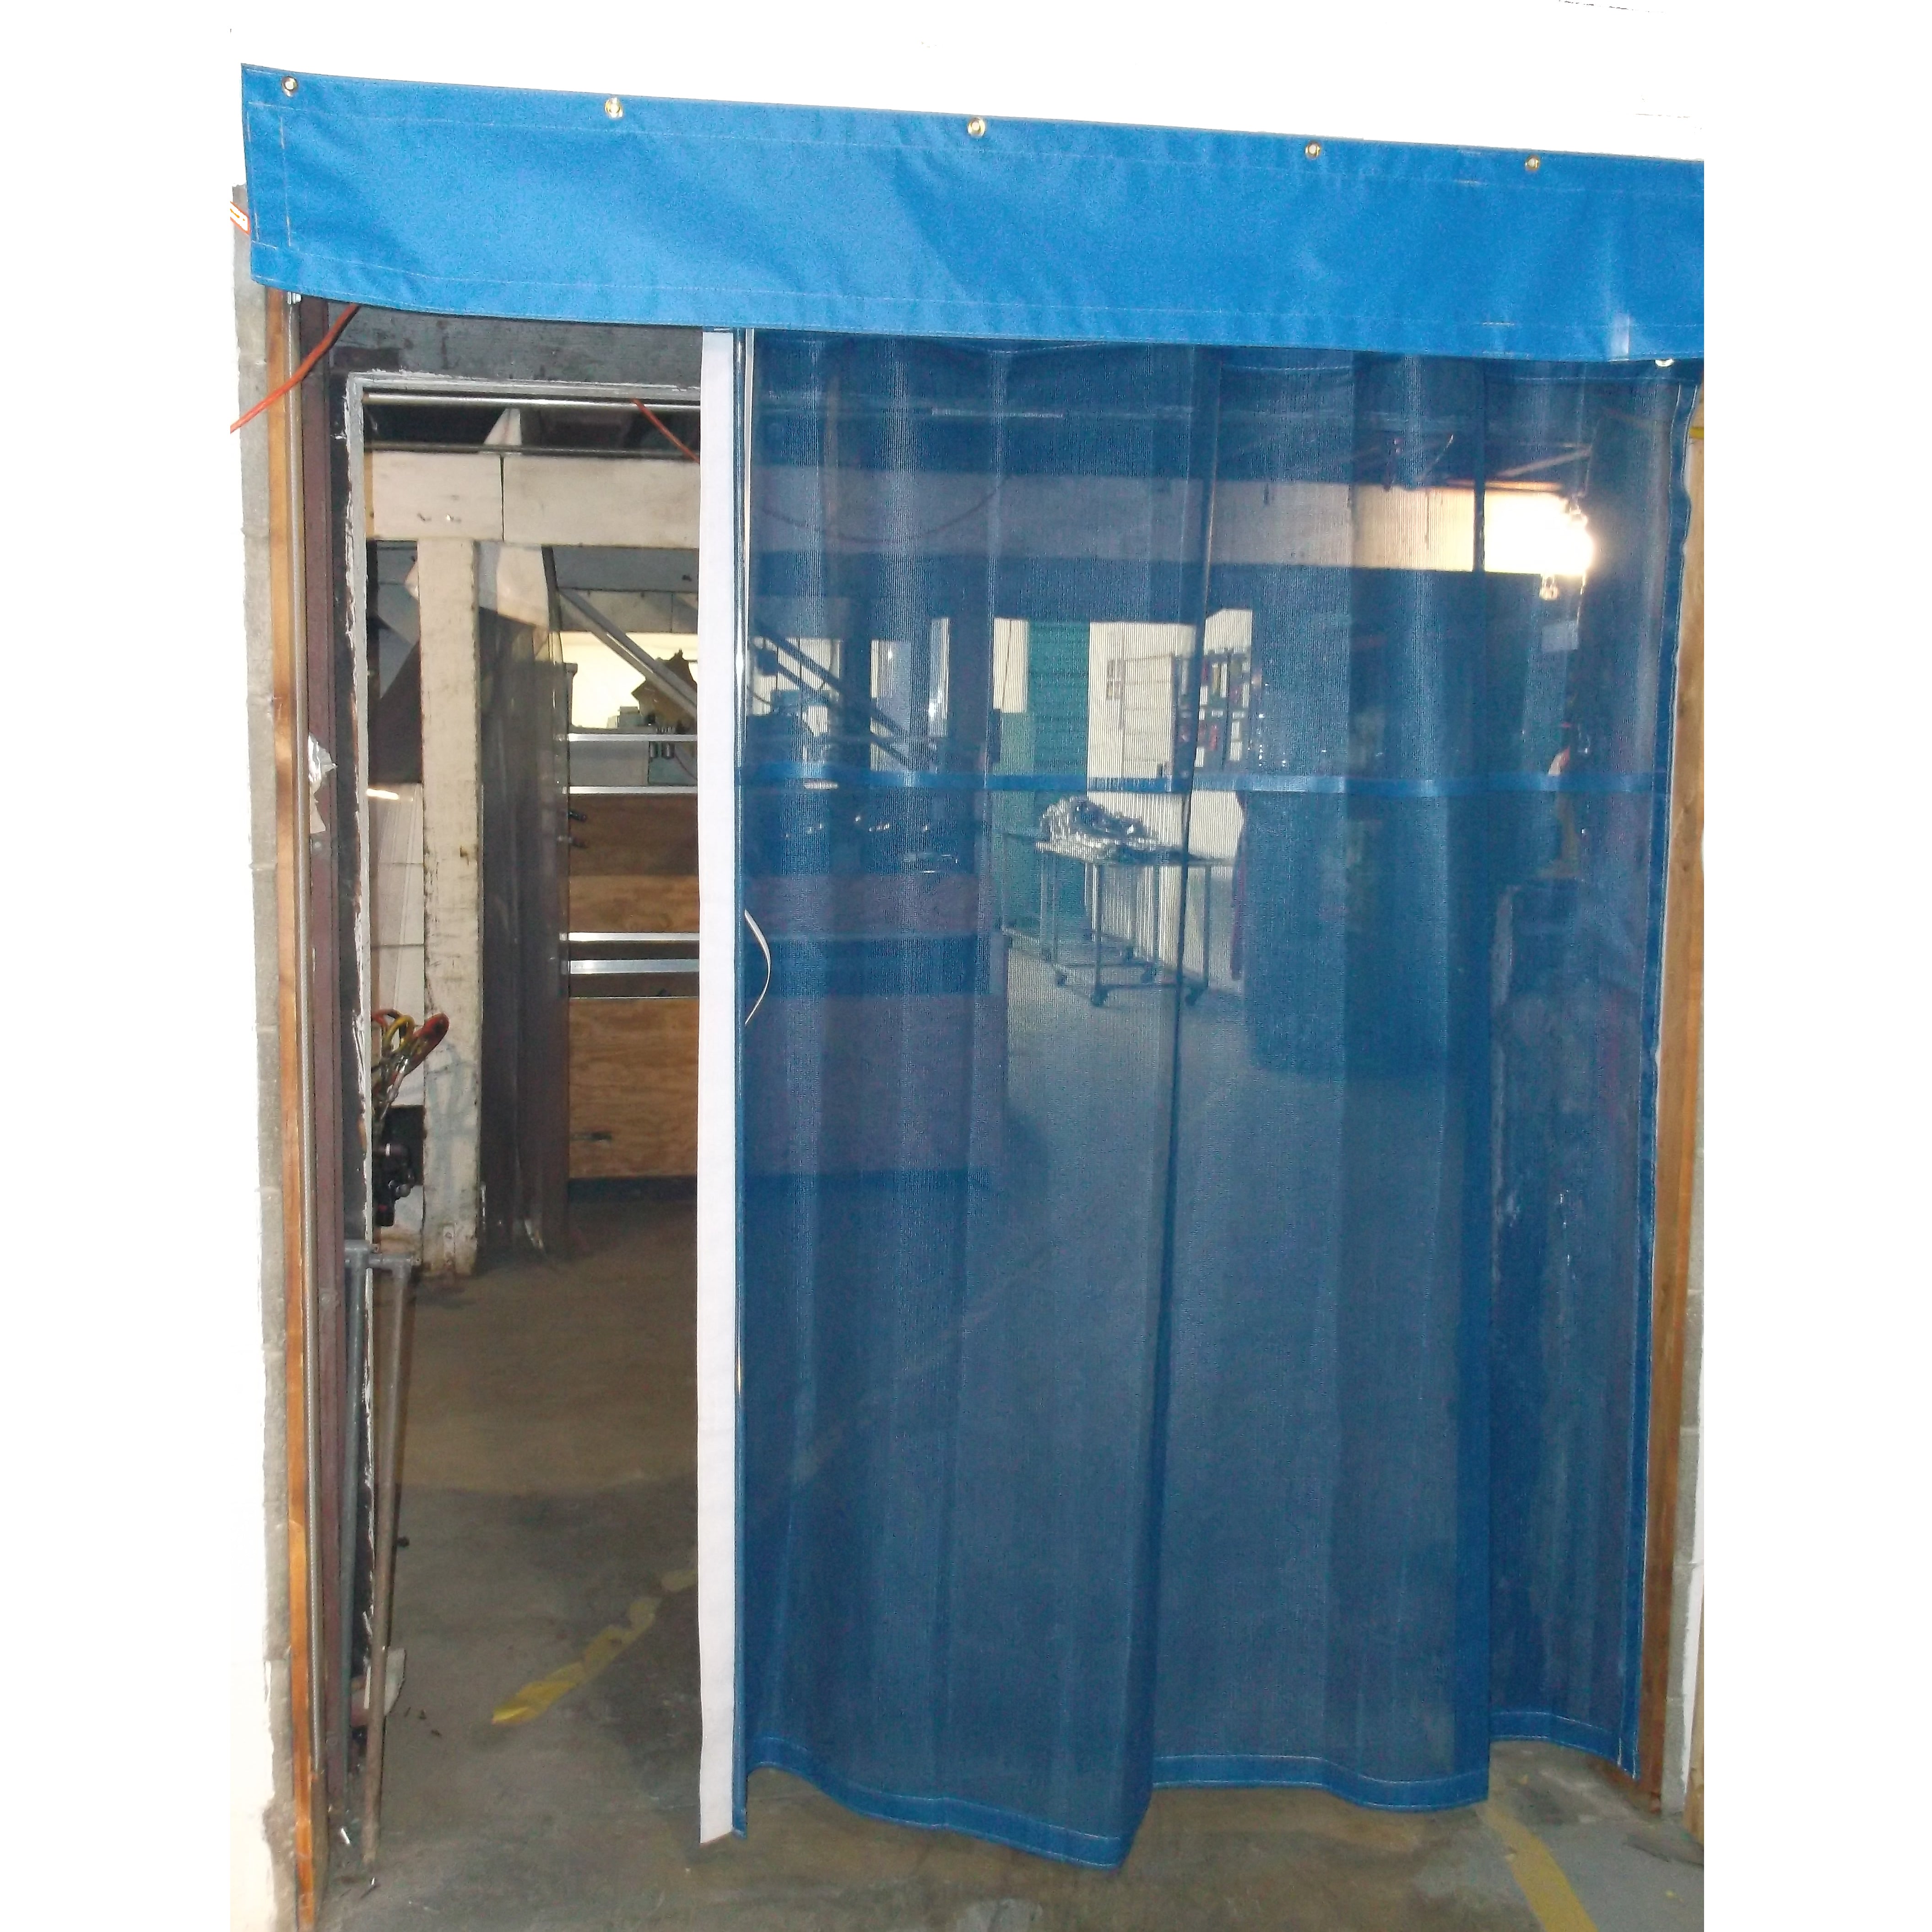 Warehouse Dock Door Bay Screens in Mesh to keep Best and Contaminants Out 